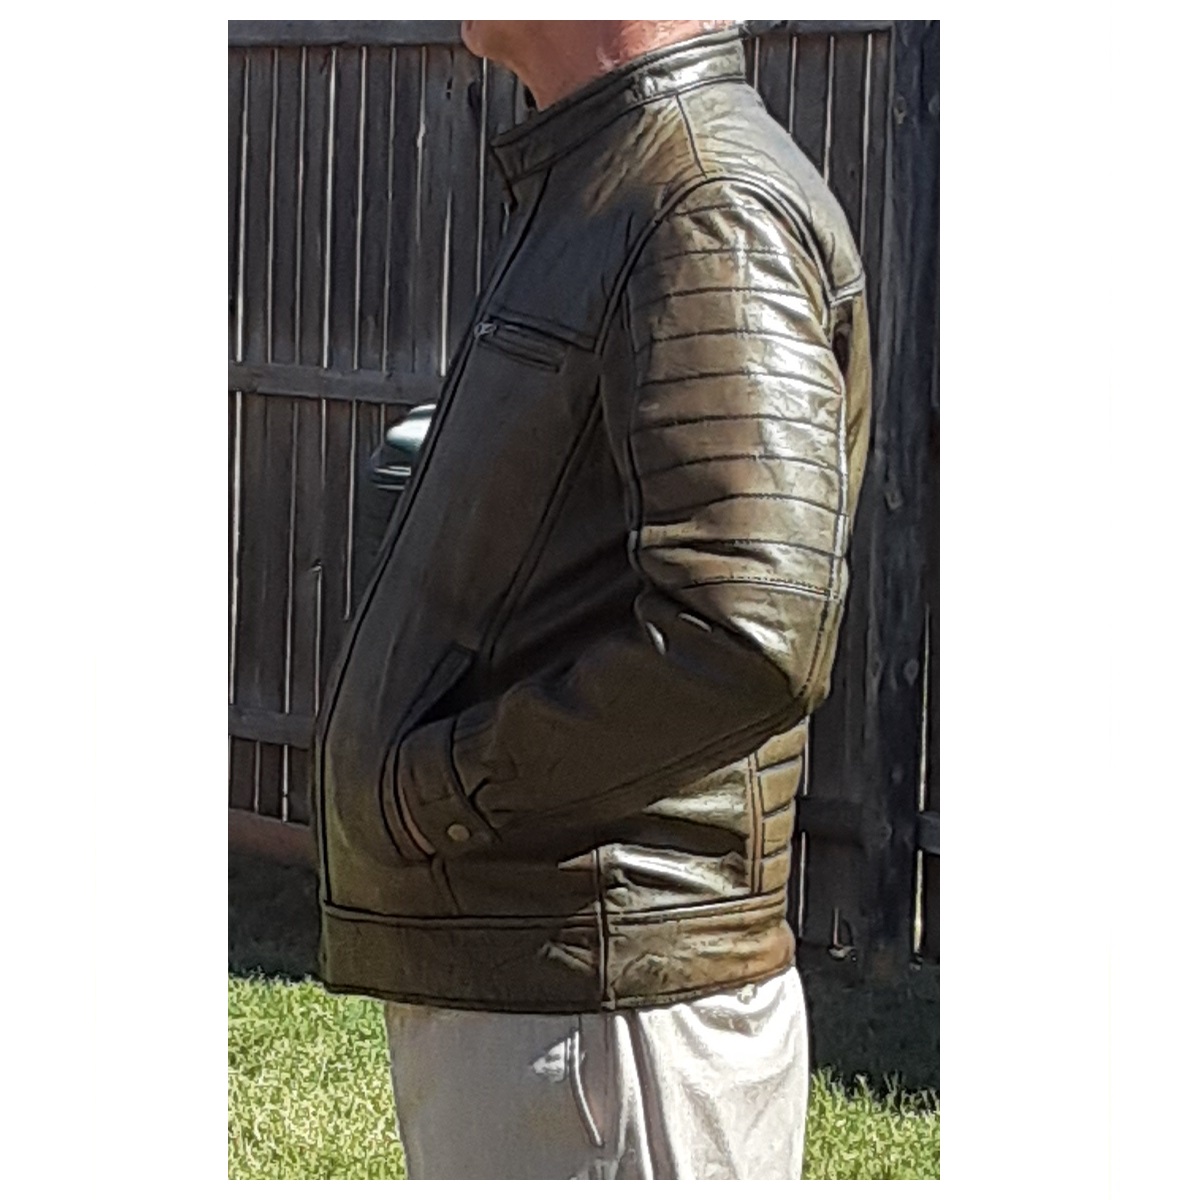 Genuine Leather Bomber Jacket for Men Oil Can Distressed Look - Soft Lambskin Jacket for men